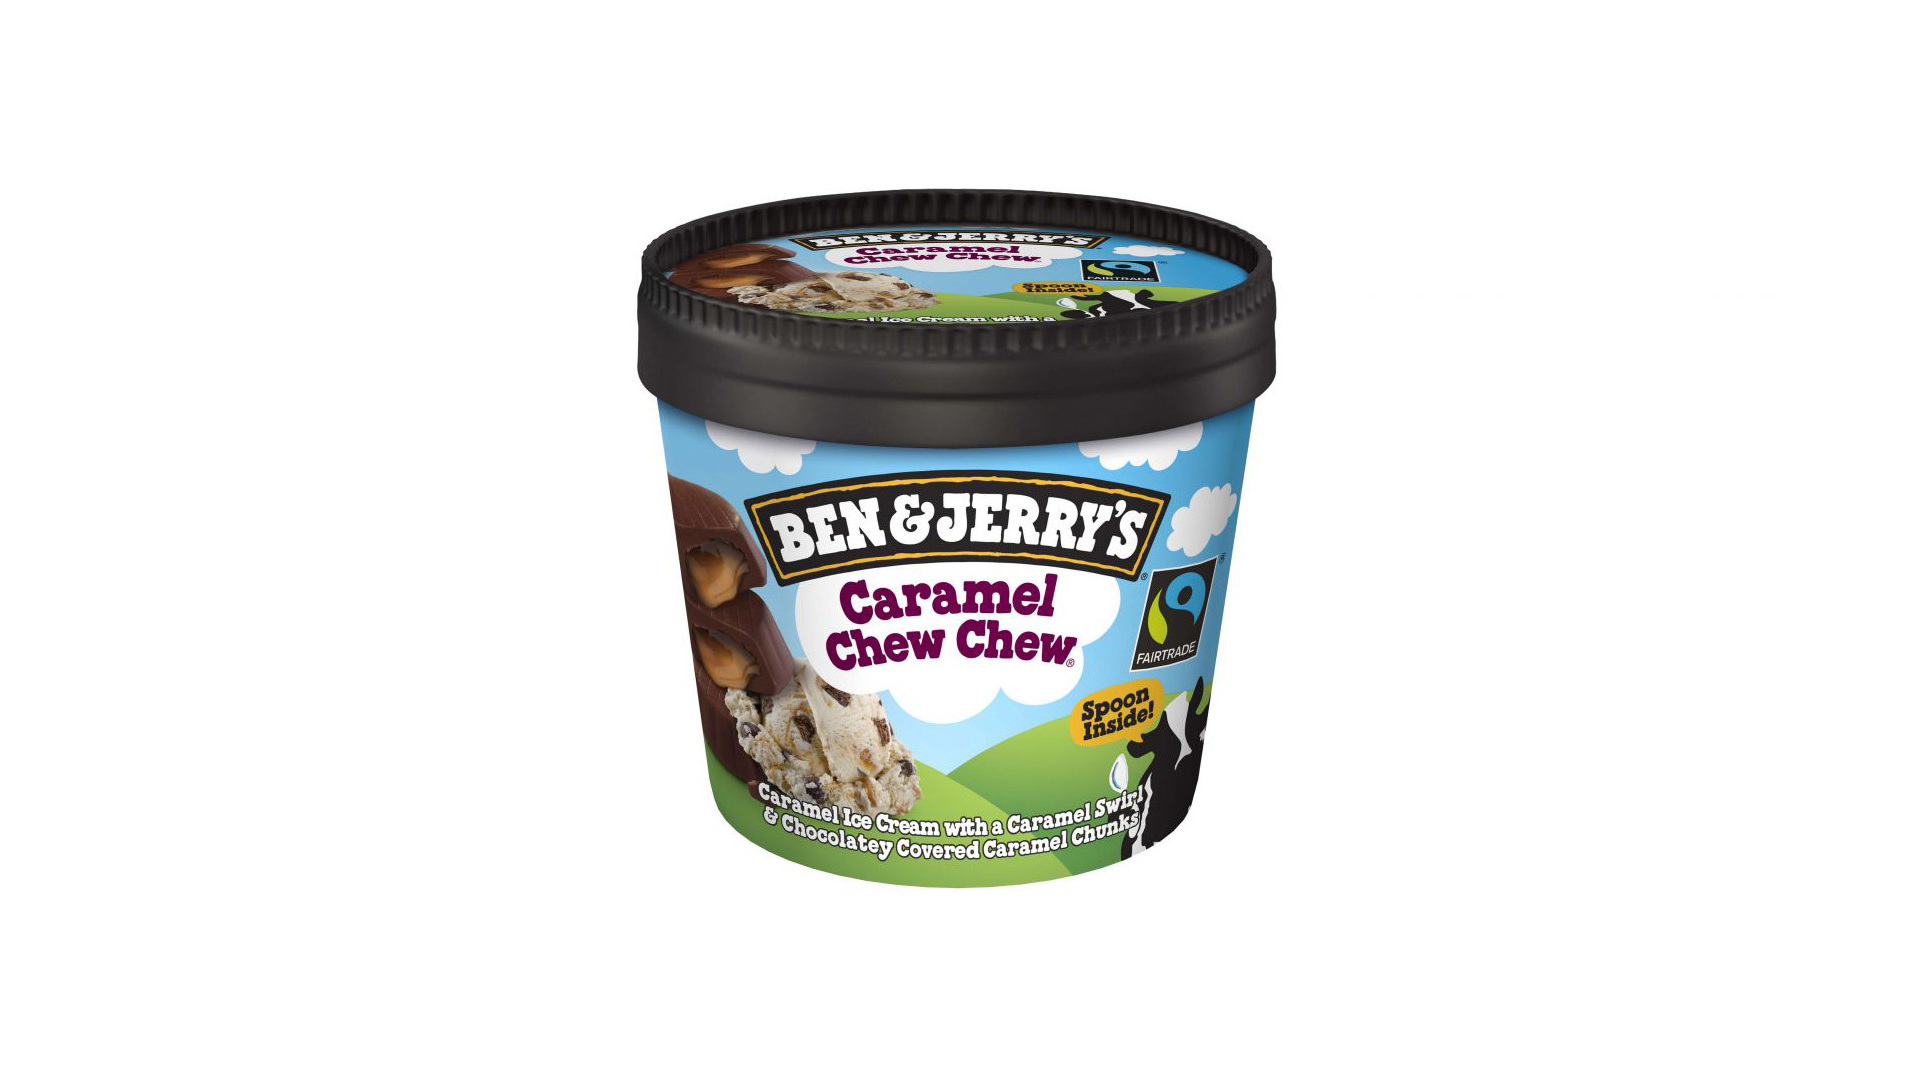 Ben & Jerry's Caramel Chew Chew 100ml - Salad Collection in Central Parade E17